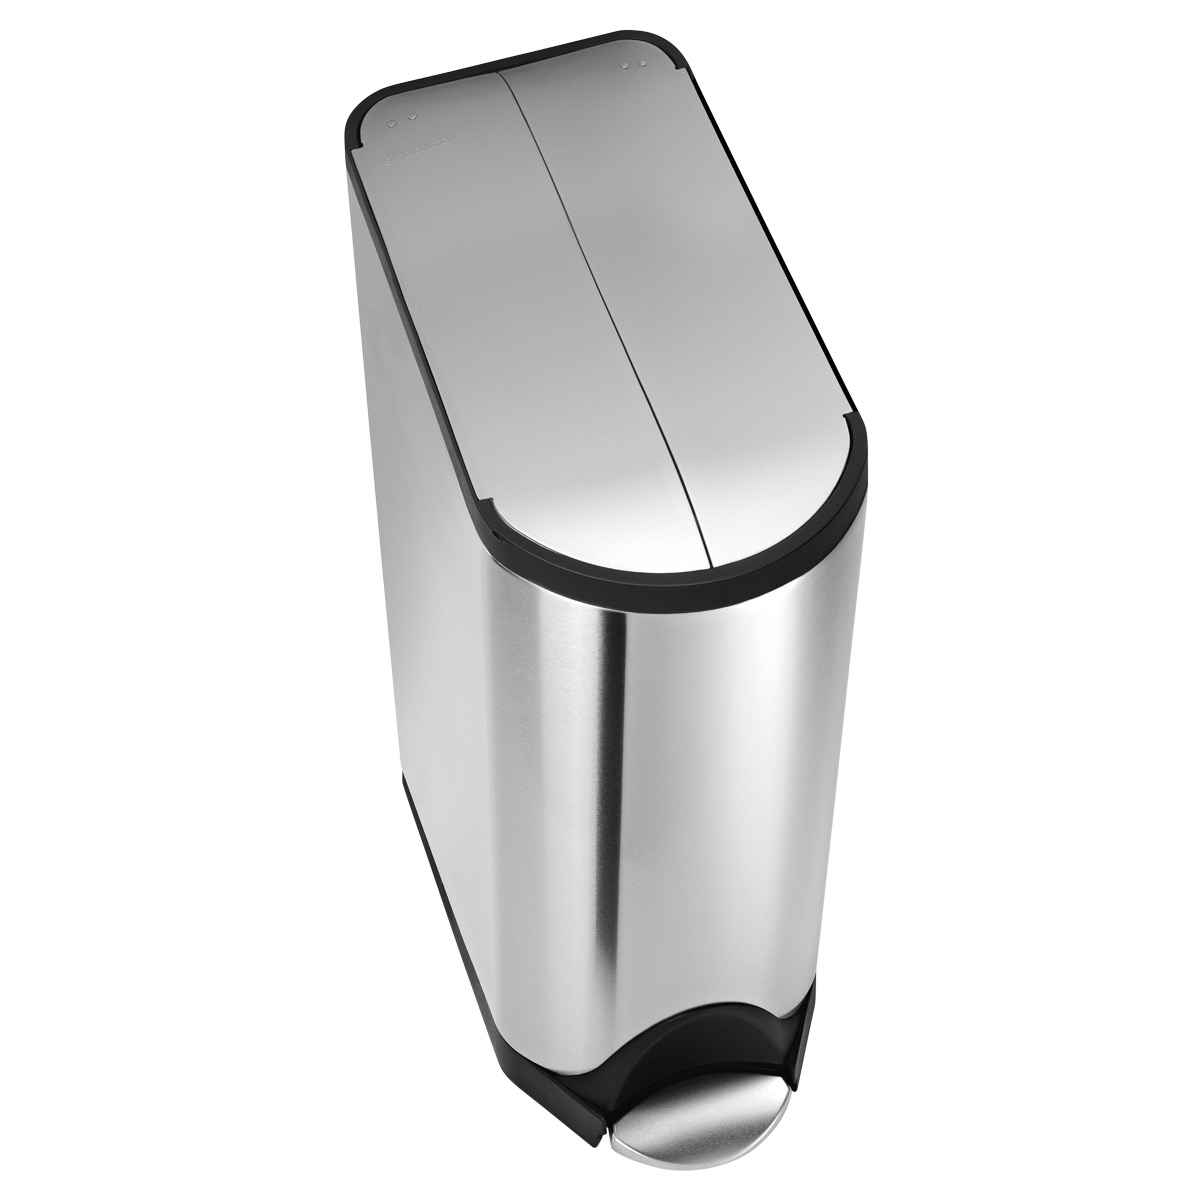 https://www.containerstore.com/catalogimages/378493/10059418-simplehuman-butterfly-trash.jpg